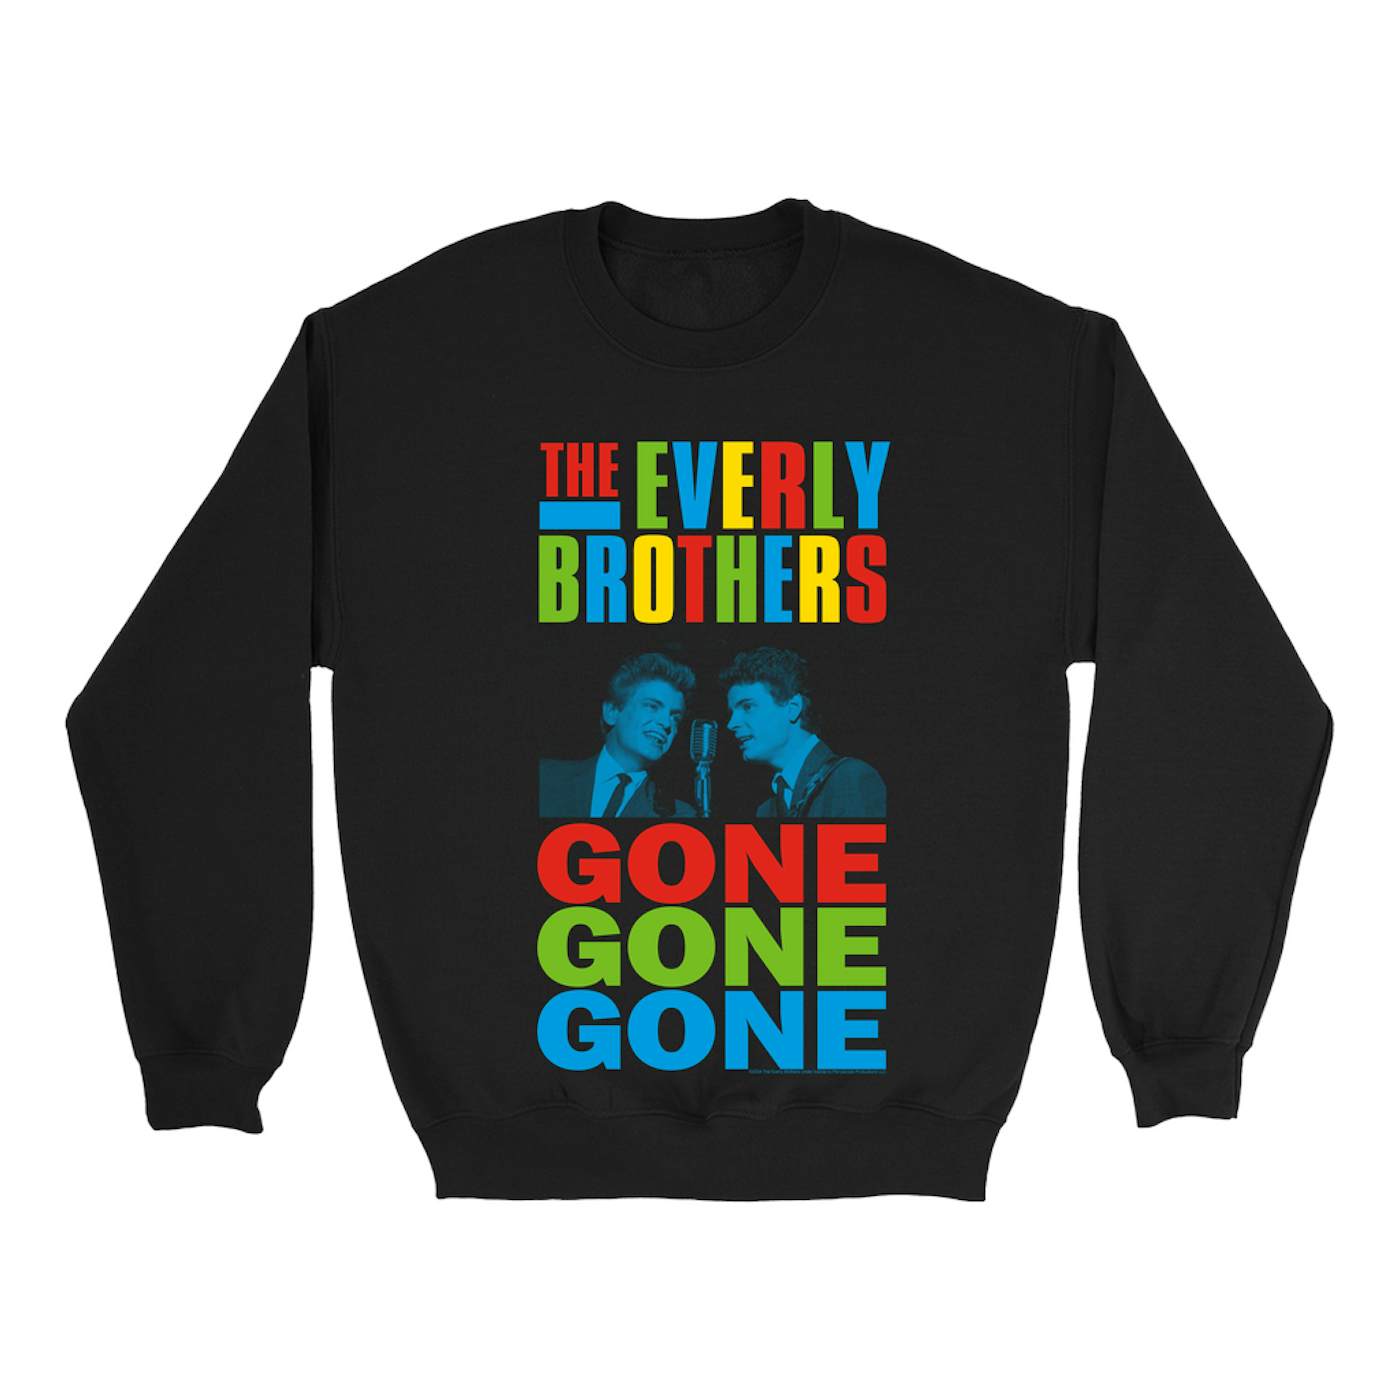 The Everly Brothers Sweatshirt | Gone, Gone, Gone Colorful The Everly Brothers Sweatshirt